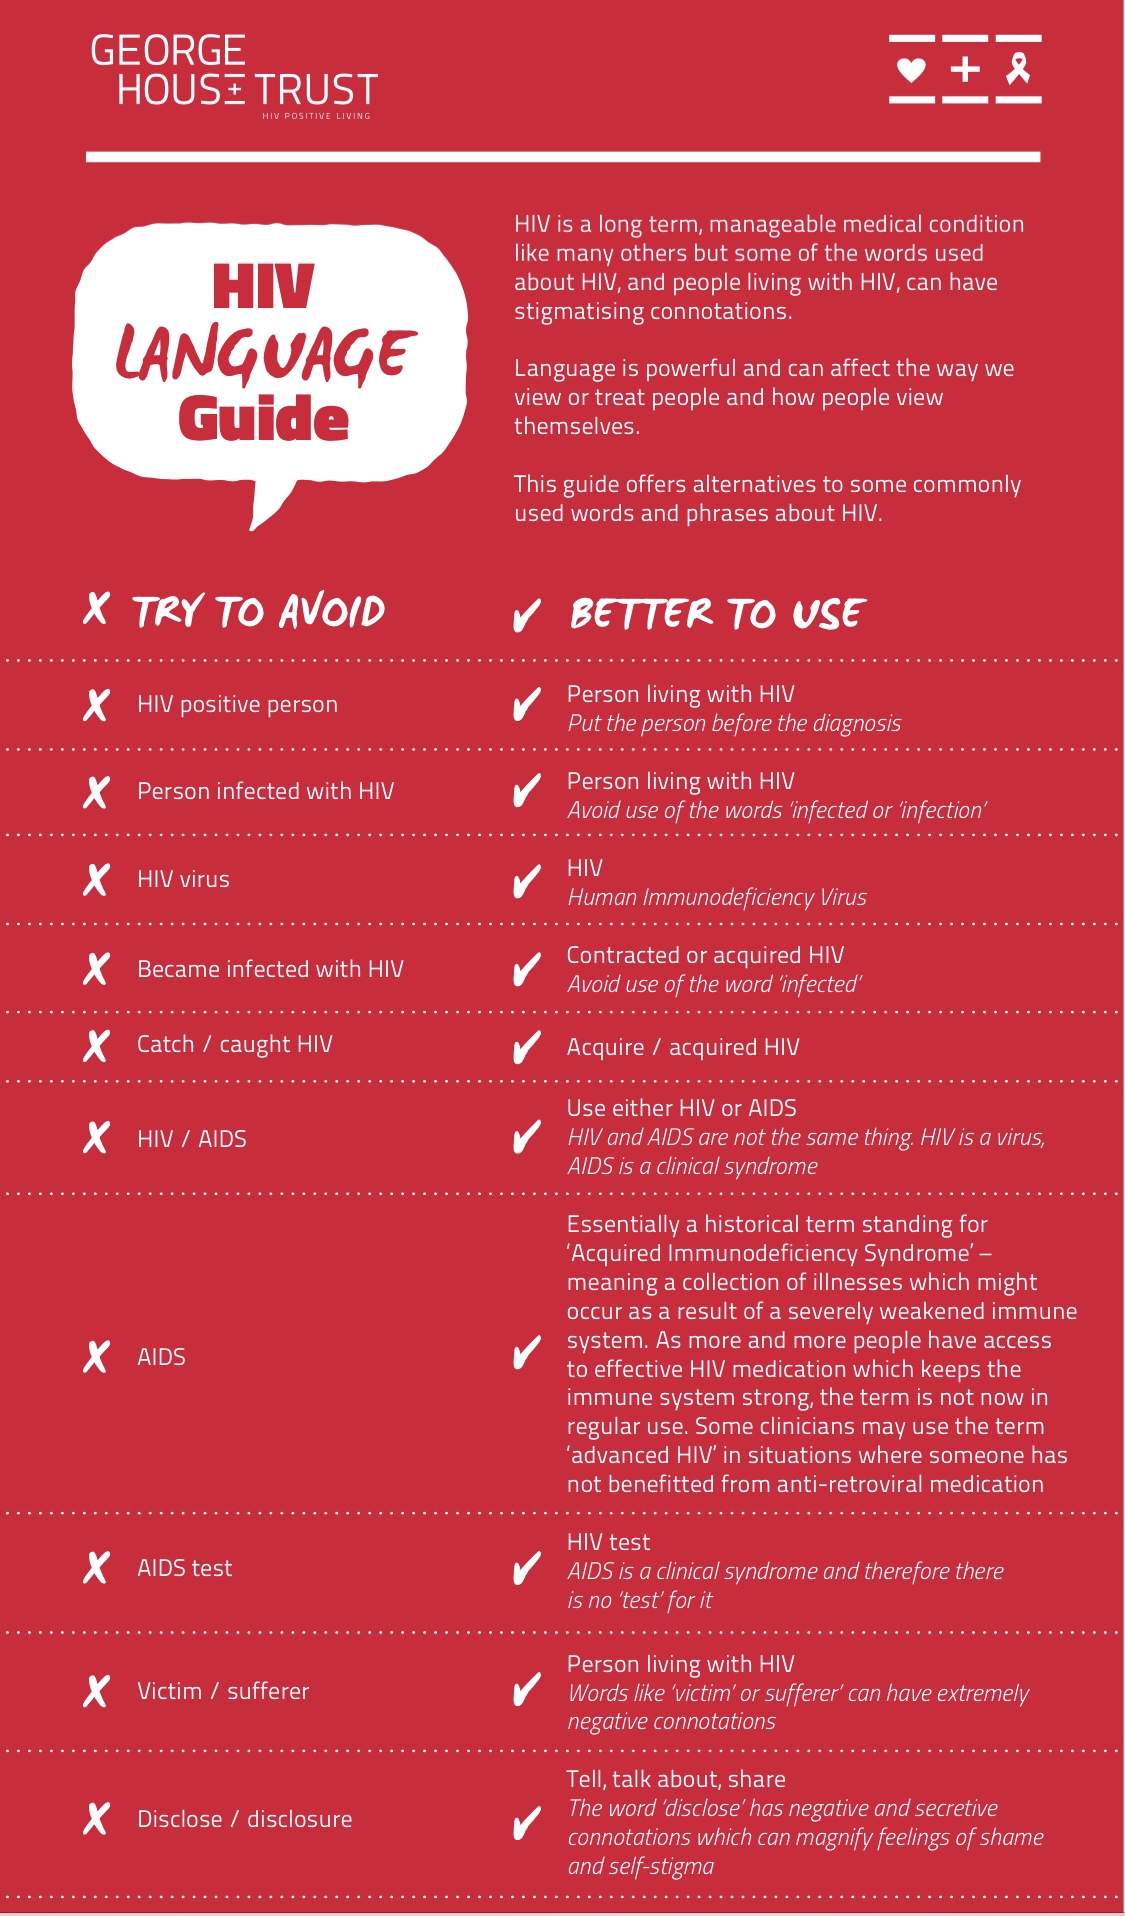 George House Trust language guide